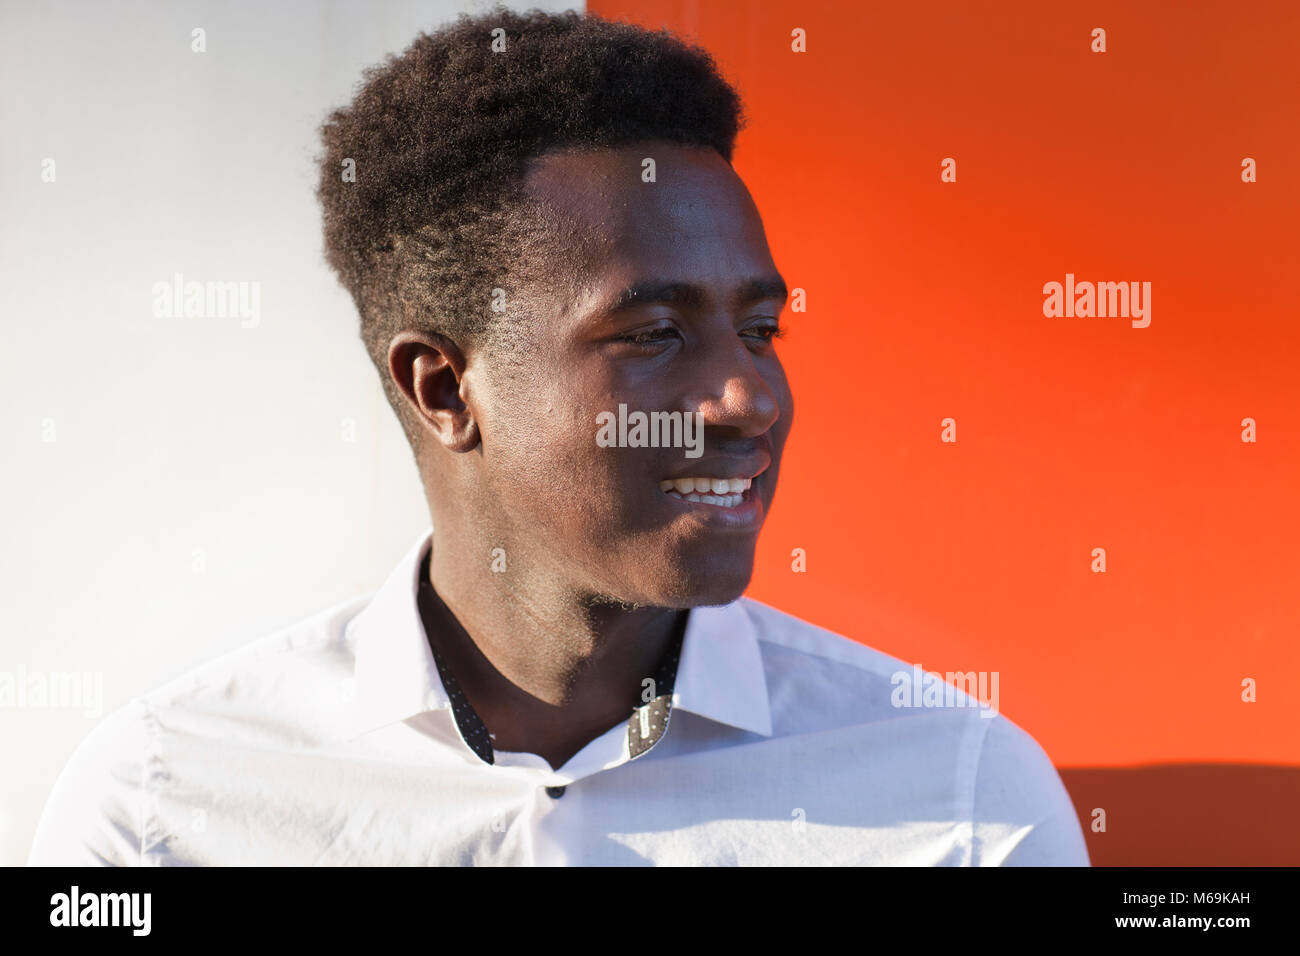 Handsome young black man looking to the side and smiling in front of orange and white divided background Stock Photo